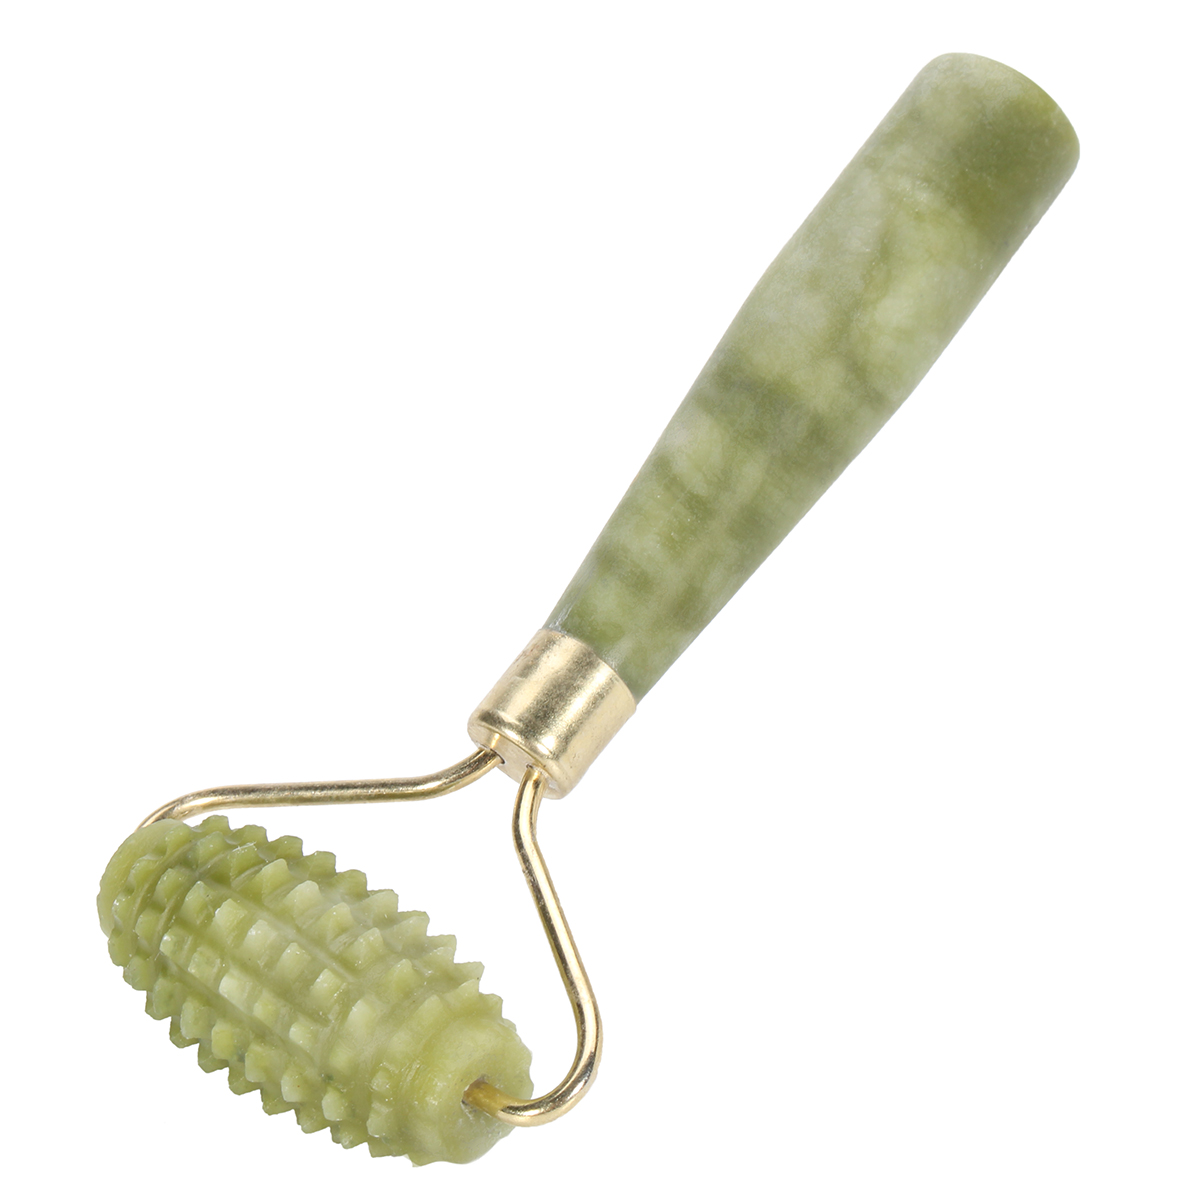 Anti-Wrinkles-Aging-Jade-Facial-Roller-Beauty-Tools-Face-Skin-Slimming-Massage-Wand-Home-1214823-3